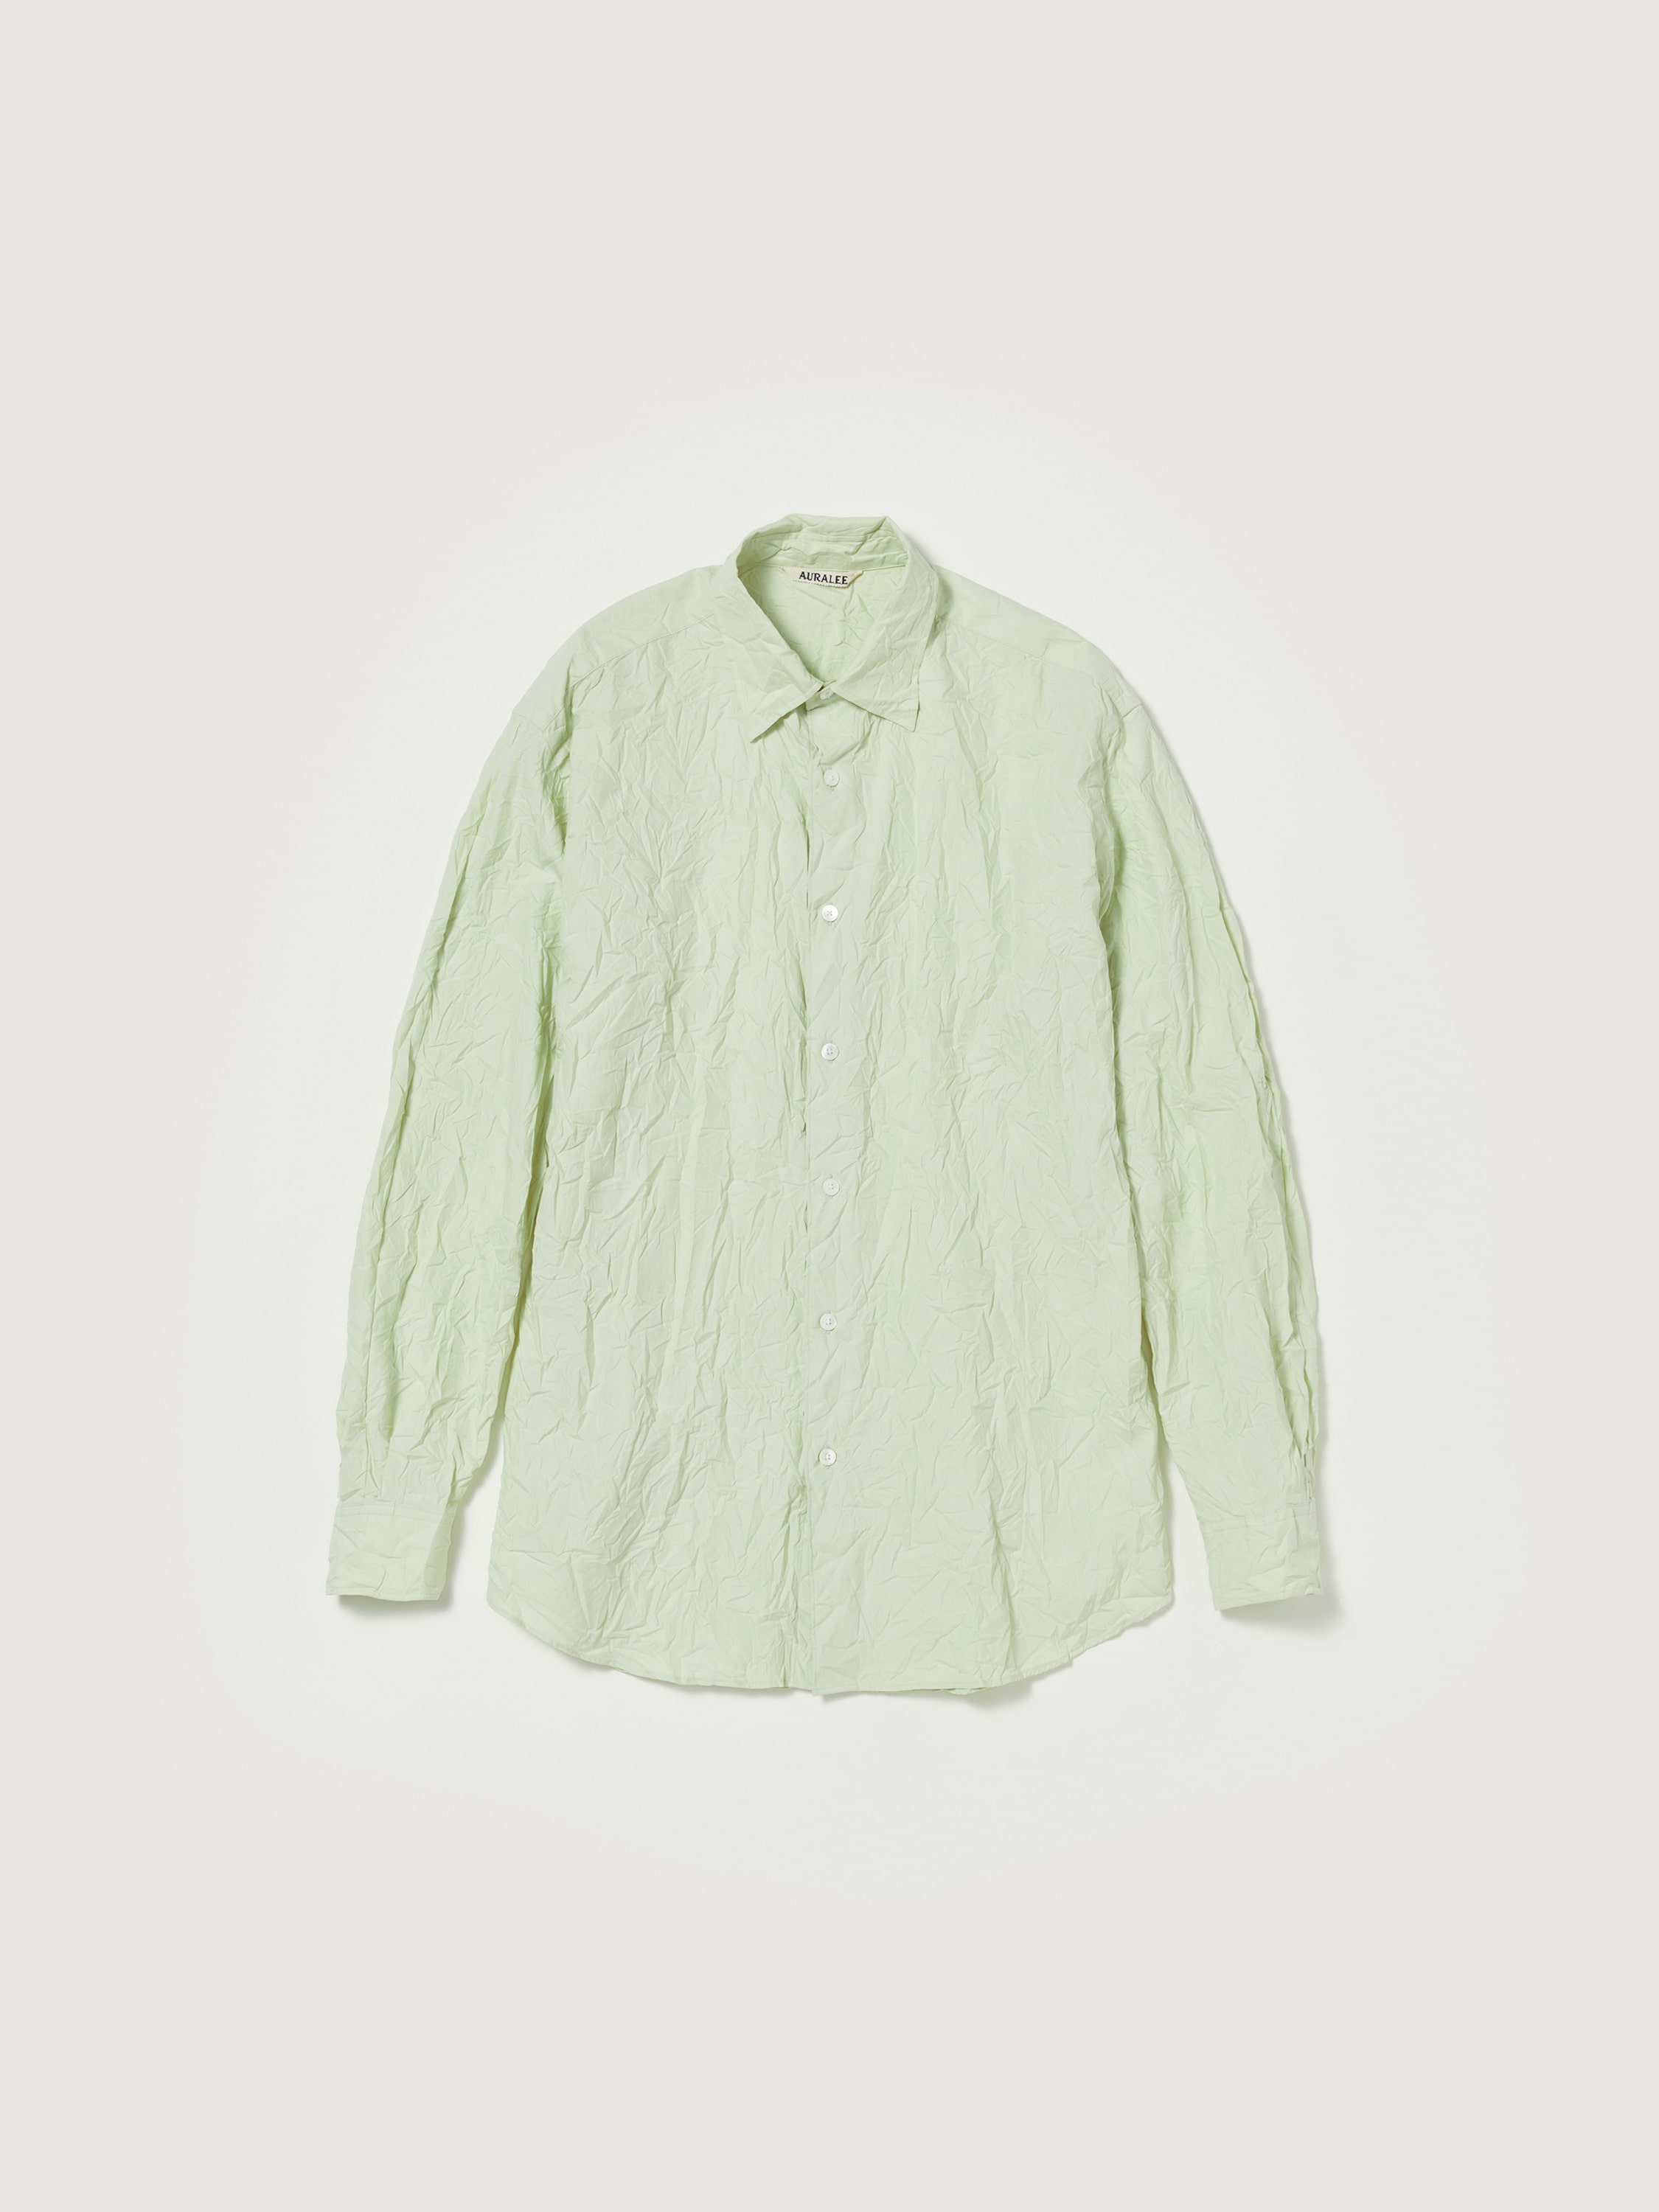 WRINKLED WASHED FINX TWILL SHIRT 詳細画像 LIGHT GREEN 4